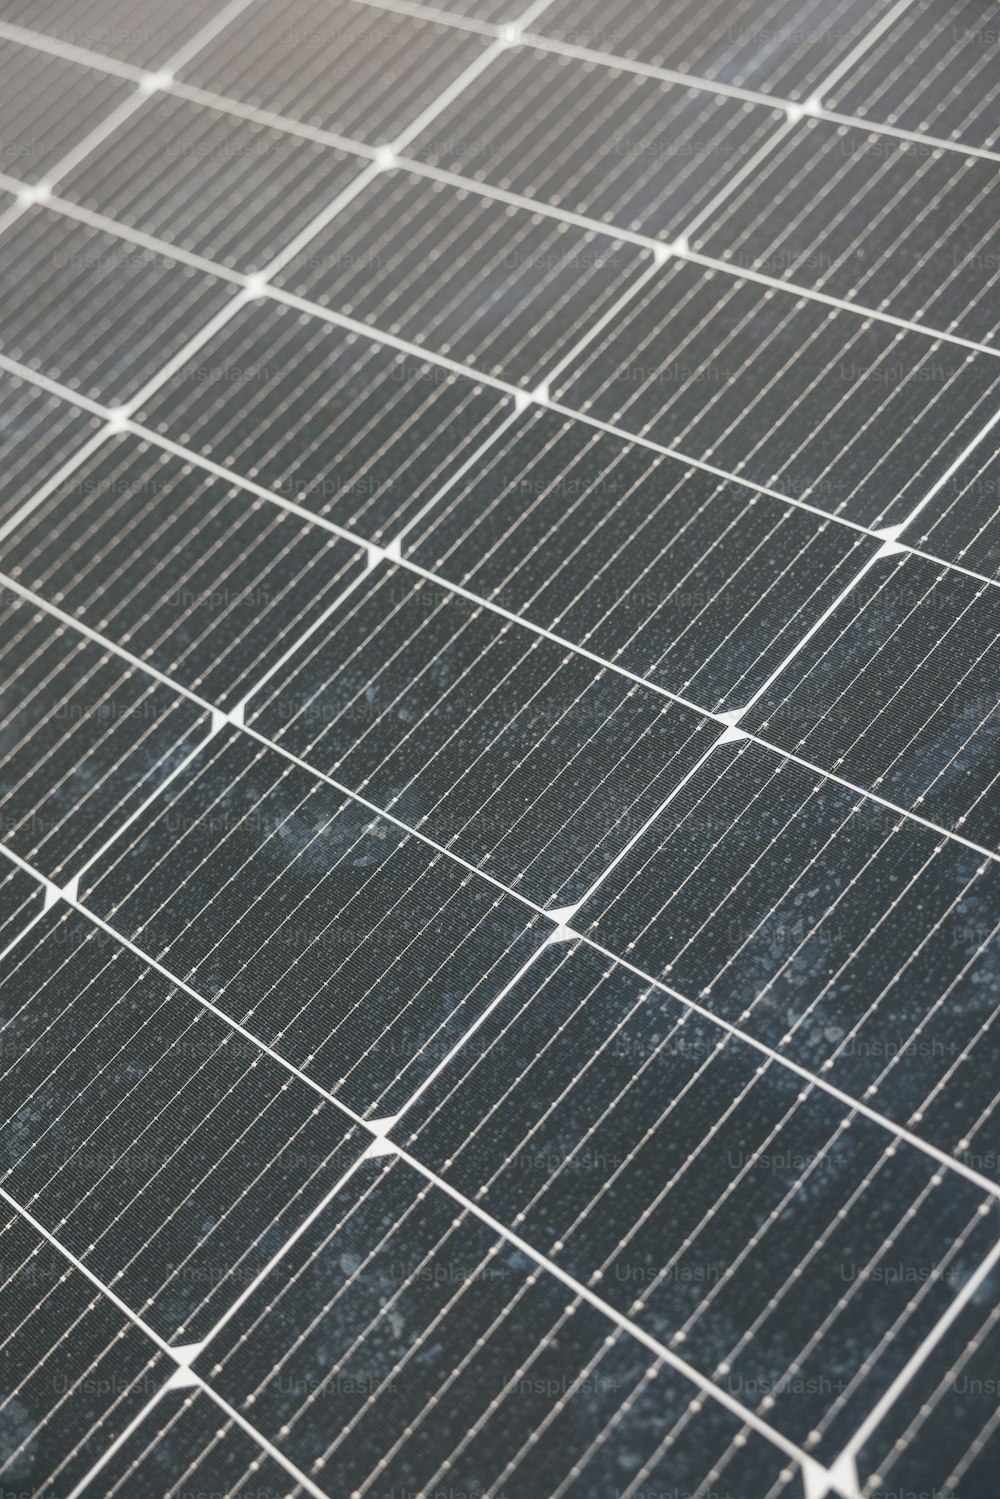 a close up of a solar panel on the ground